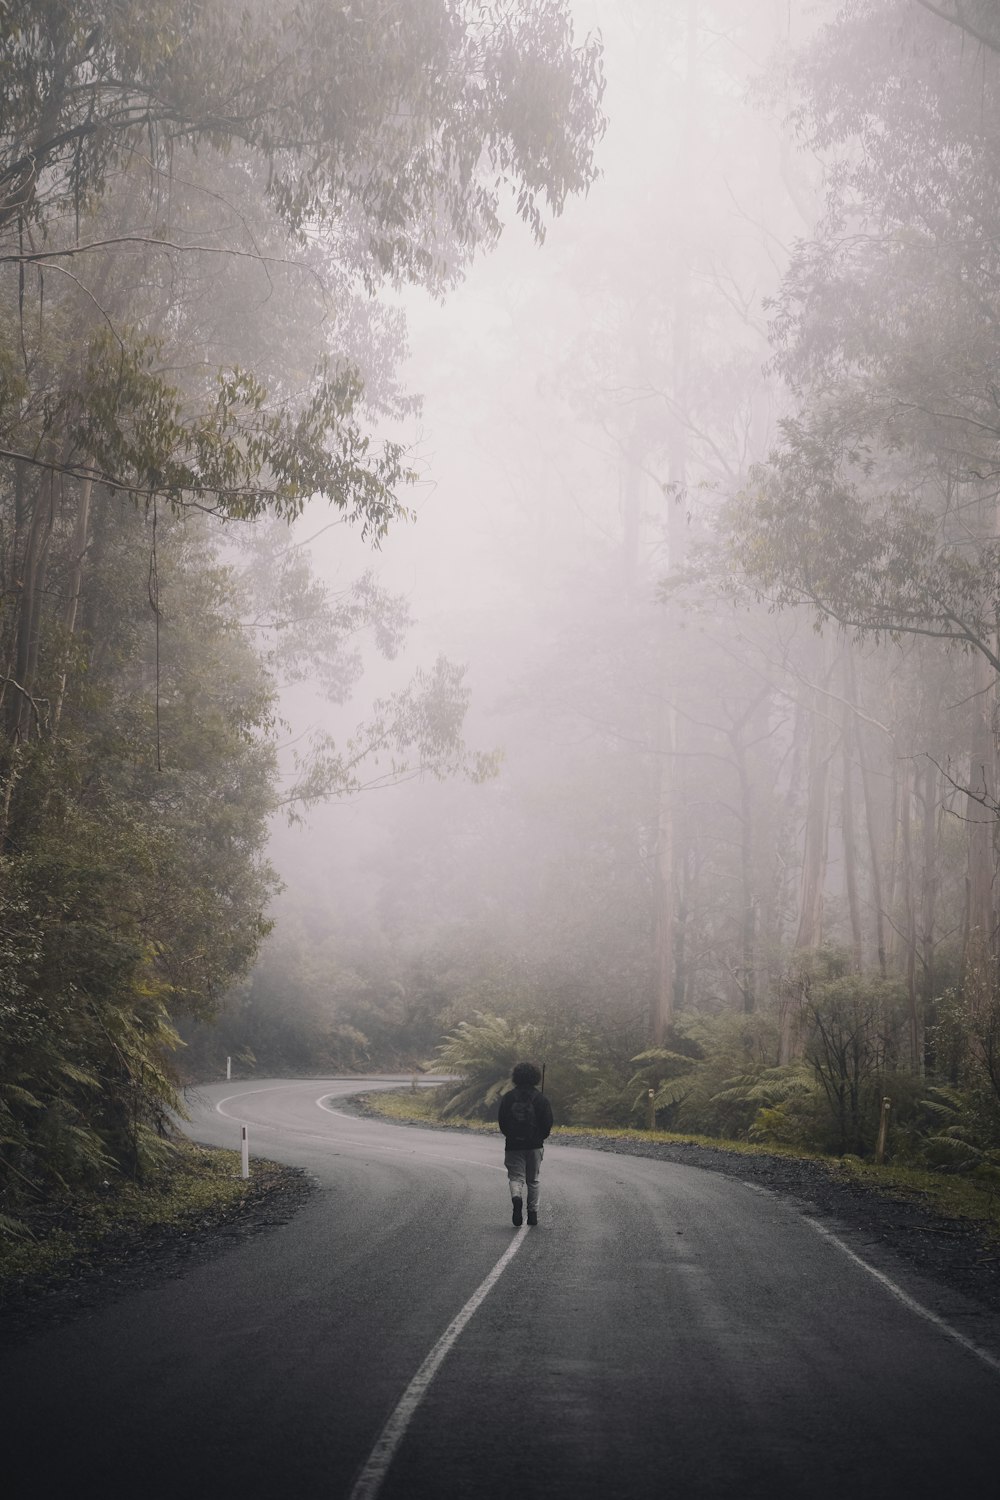 person in black jacket walking on road between trees during foggy weather